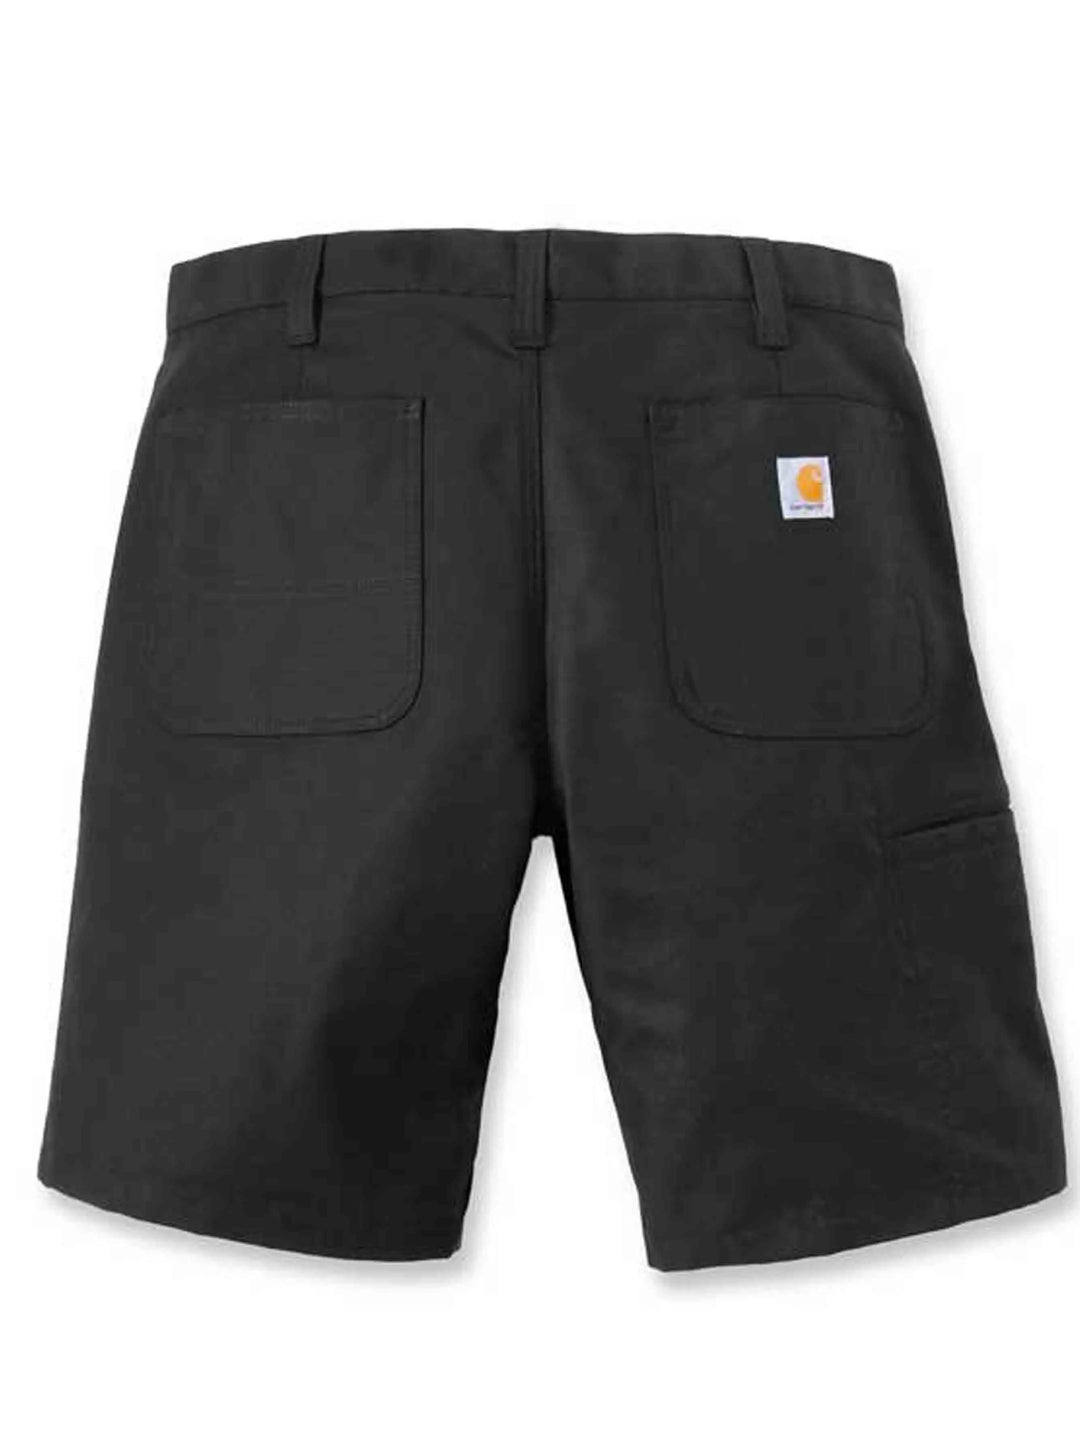 Carhartt Rugged Professional Series Relaxed Fit Short 10 Inch Black Prior